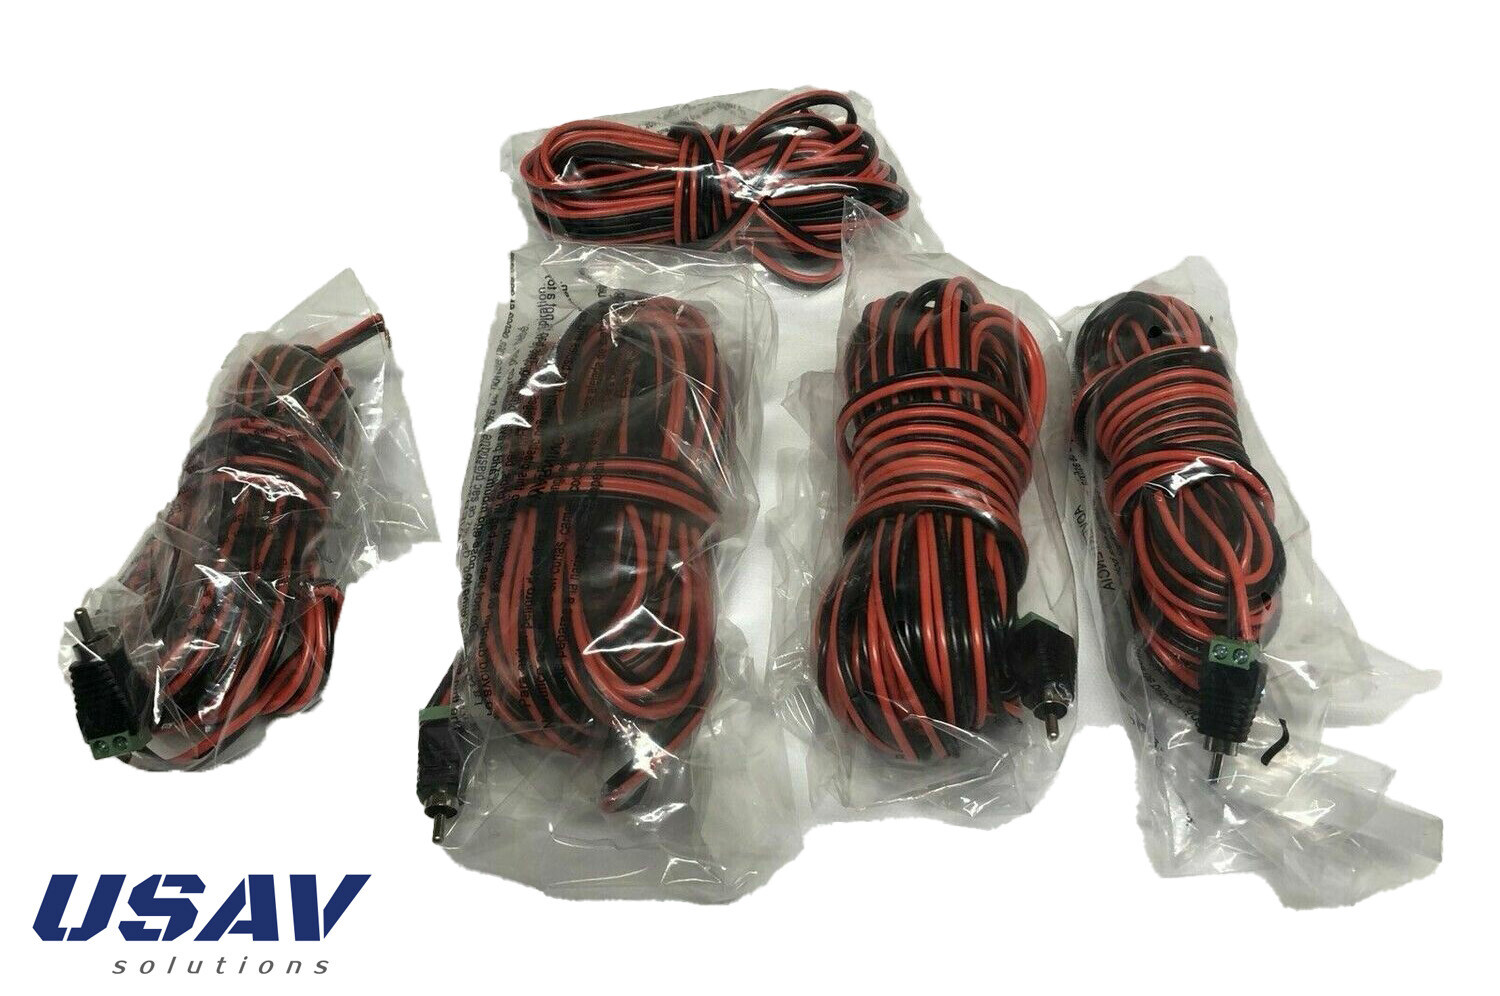 Speaker Cables for Bose Acoustimass Lifestyle - RCA to Bare Wire 5 Set Black